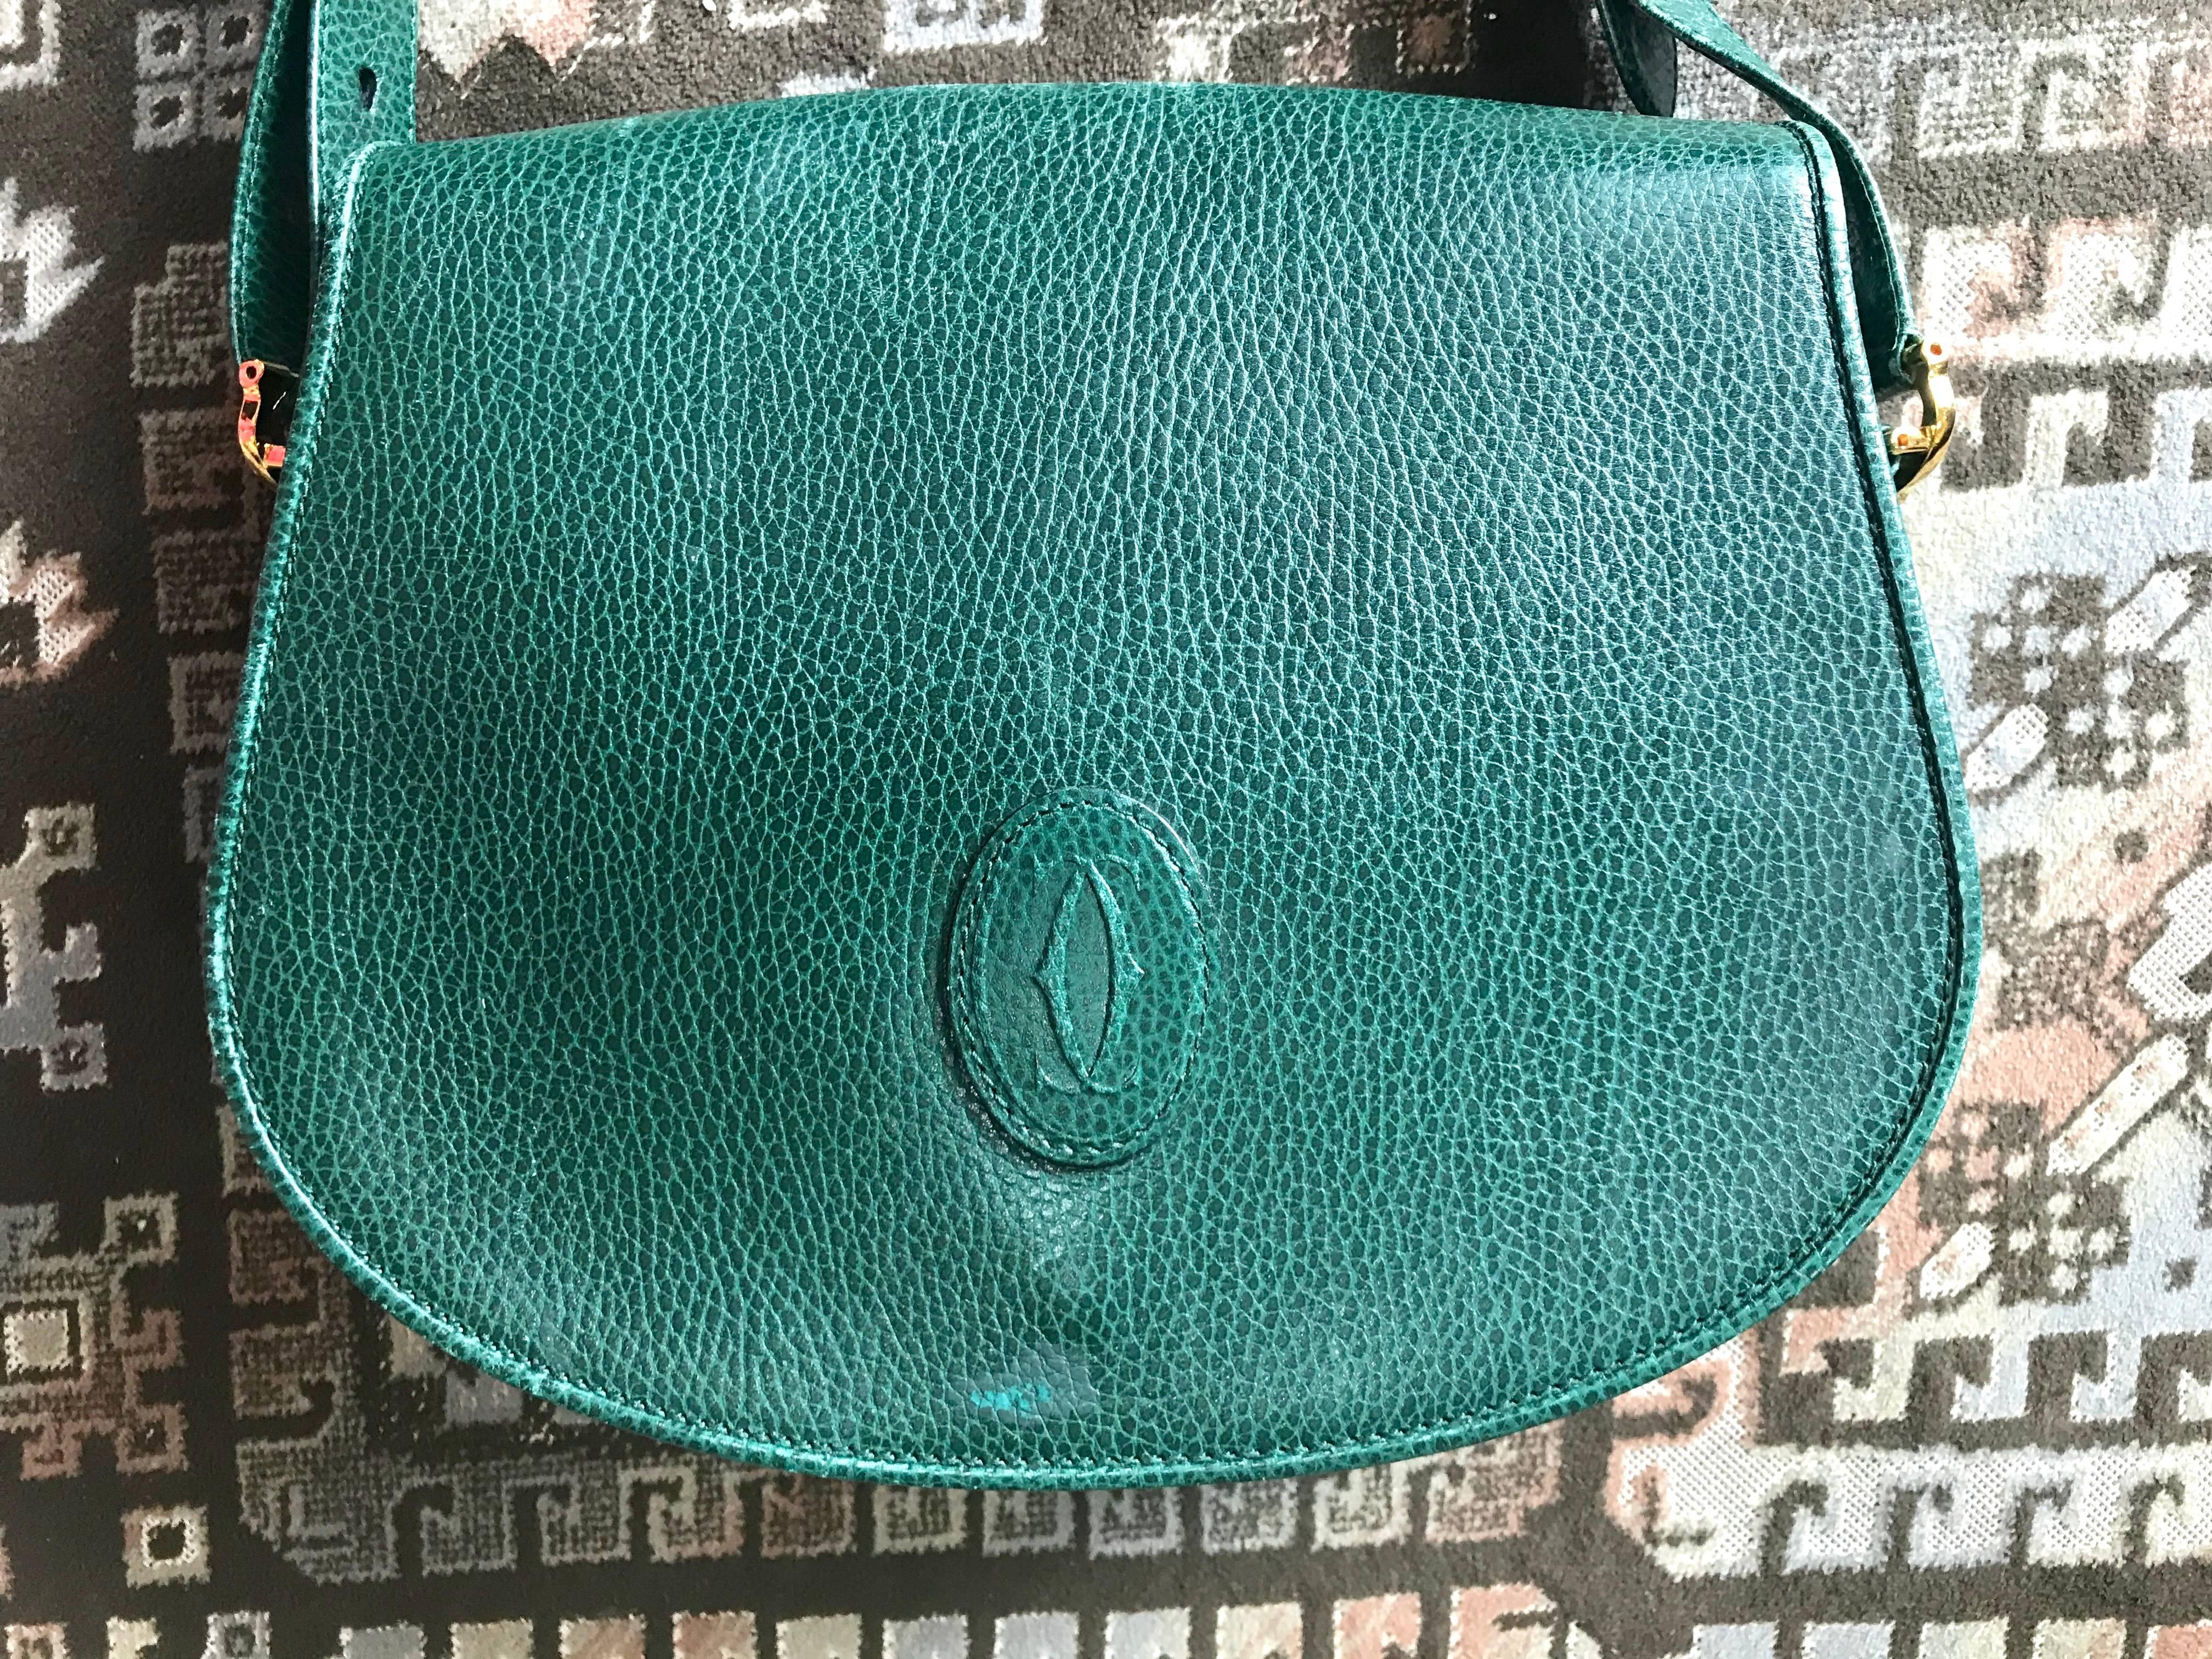 1990s. Vintage Cartier green grained leather oval round shape shoulder bag. Rare color bag from must de Cartier collection. Must have purse.

Looking classic and elegant!  
Introducing another fabulous Cartier vintage purse from 90's. 

Rare green